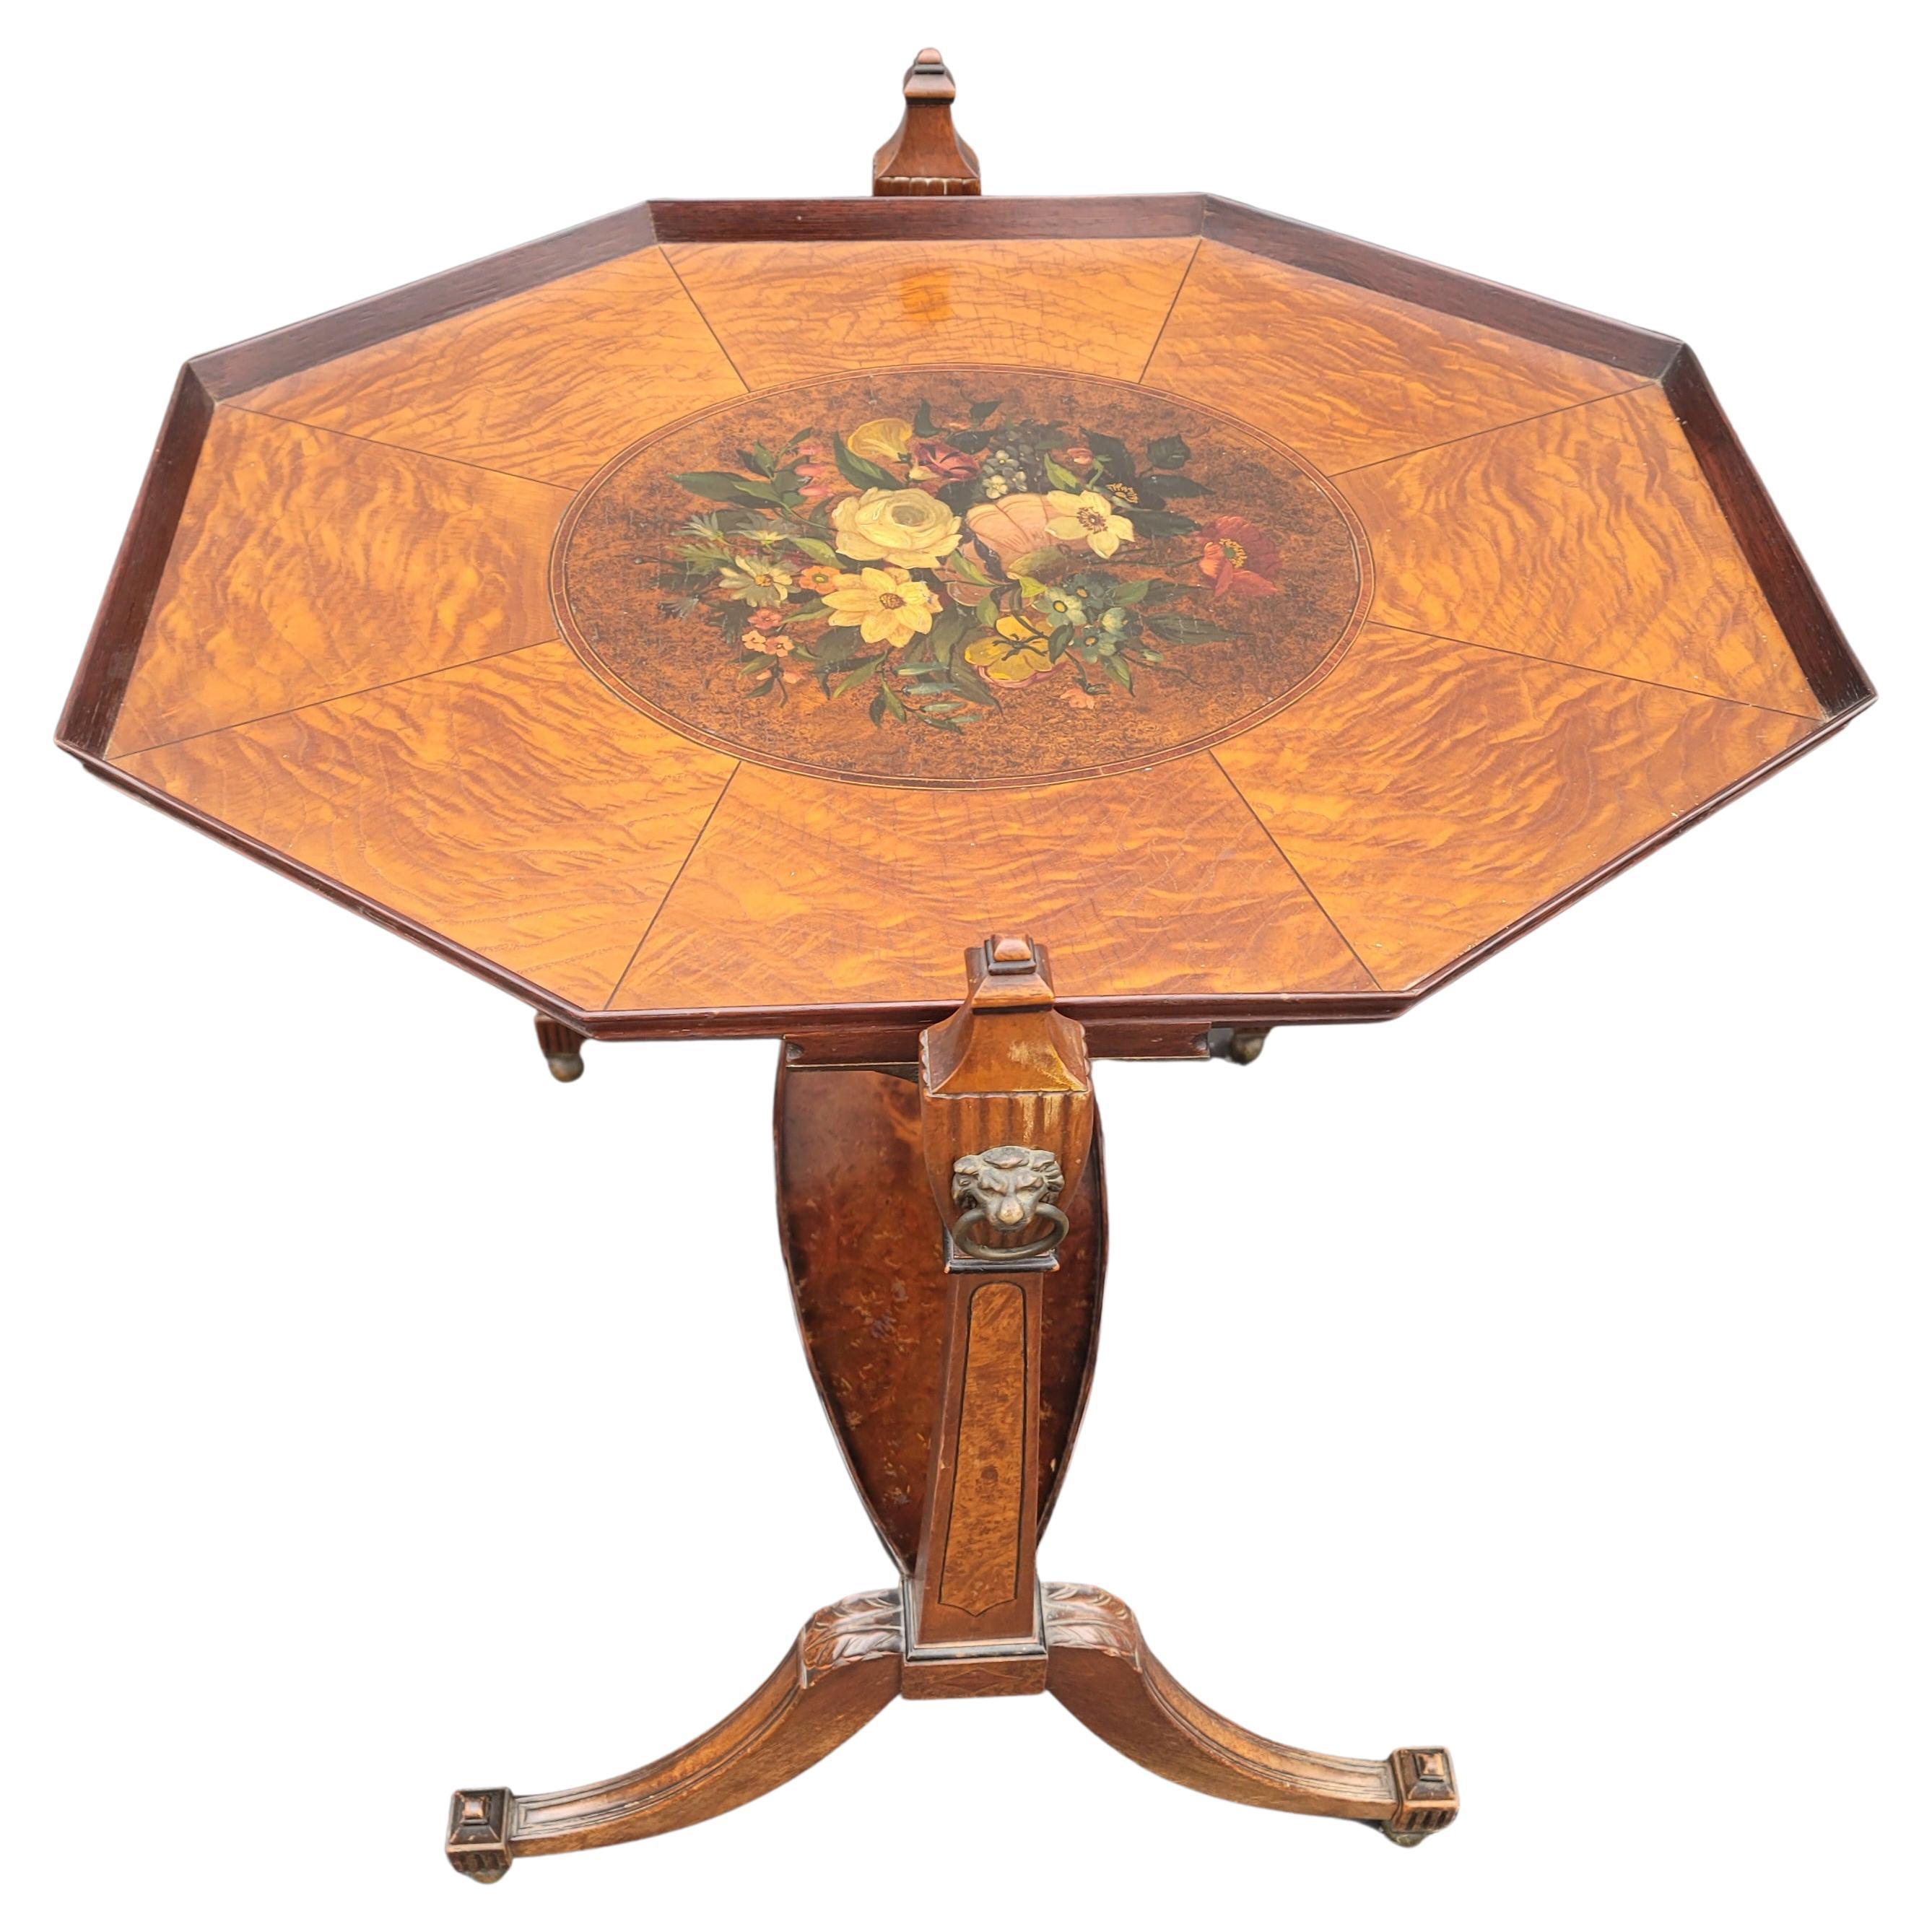 An incredible octogonal mid-century Edwardian style tray table in burl walnut and hand painted. Features a very steady Flip top with wrll functioning locking mechanism. 
Measures 23.5